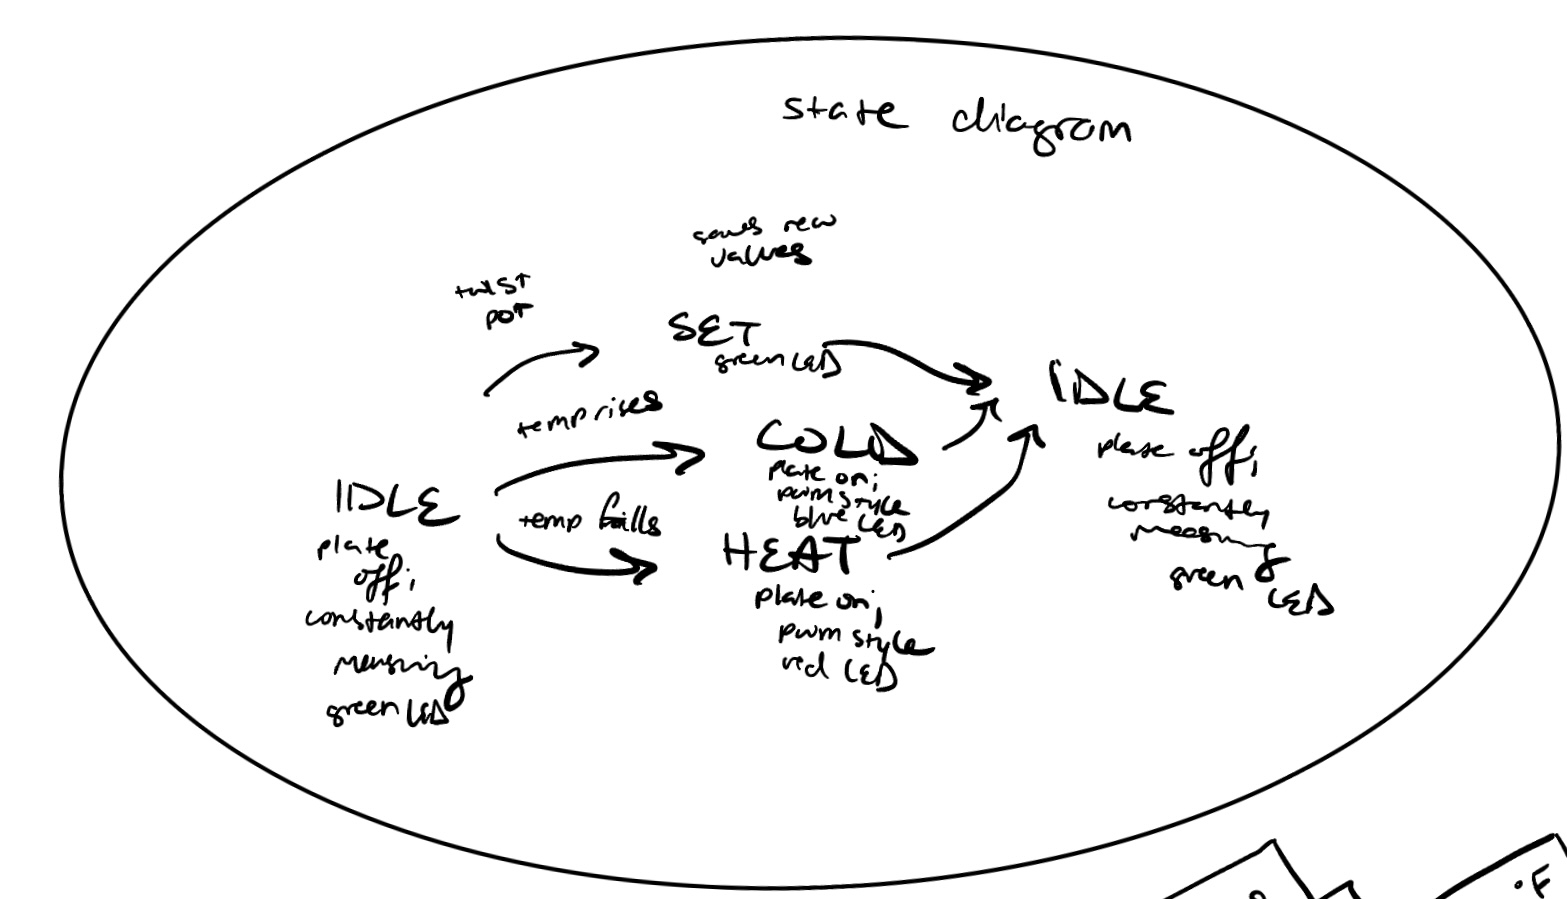 State Diagram of system